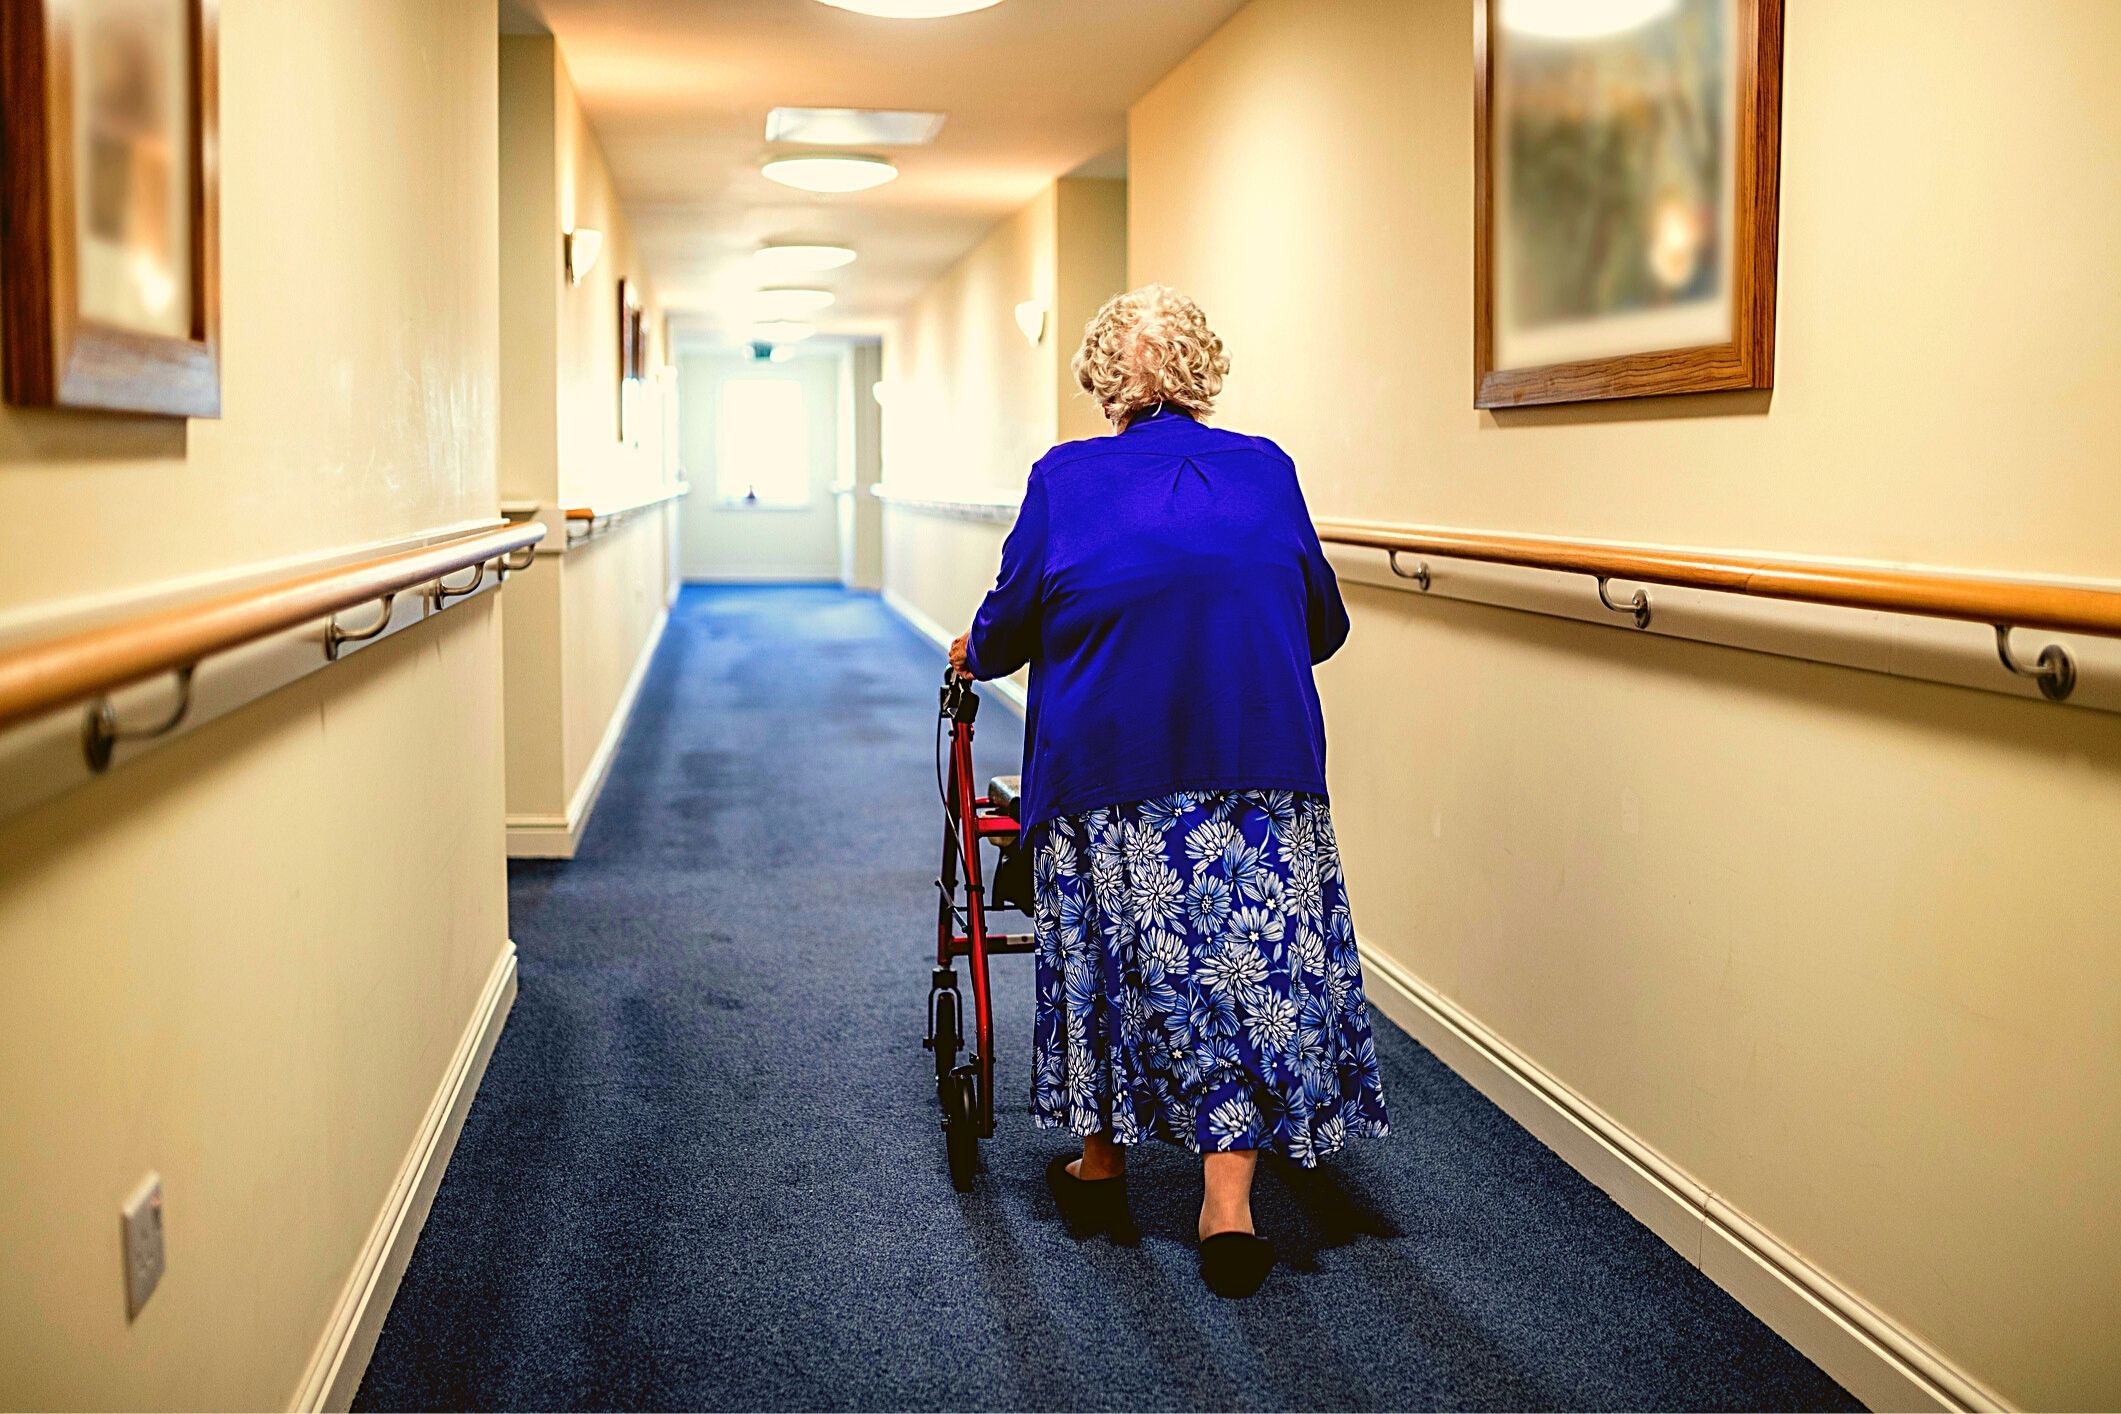 Only 3.8% of Australian aged care homes would meet new mandatory minimum staffing standards